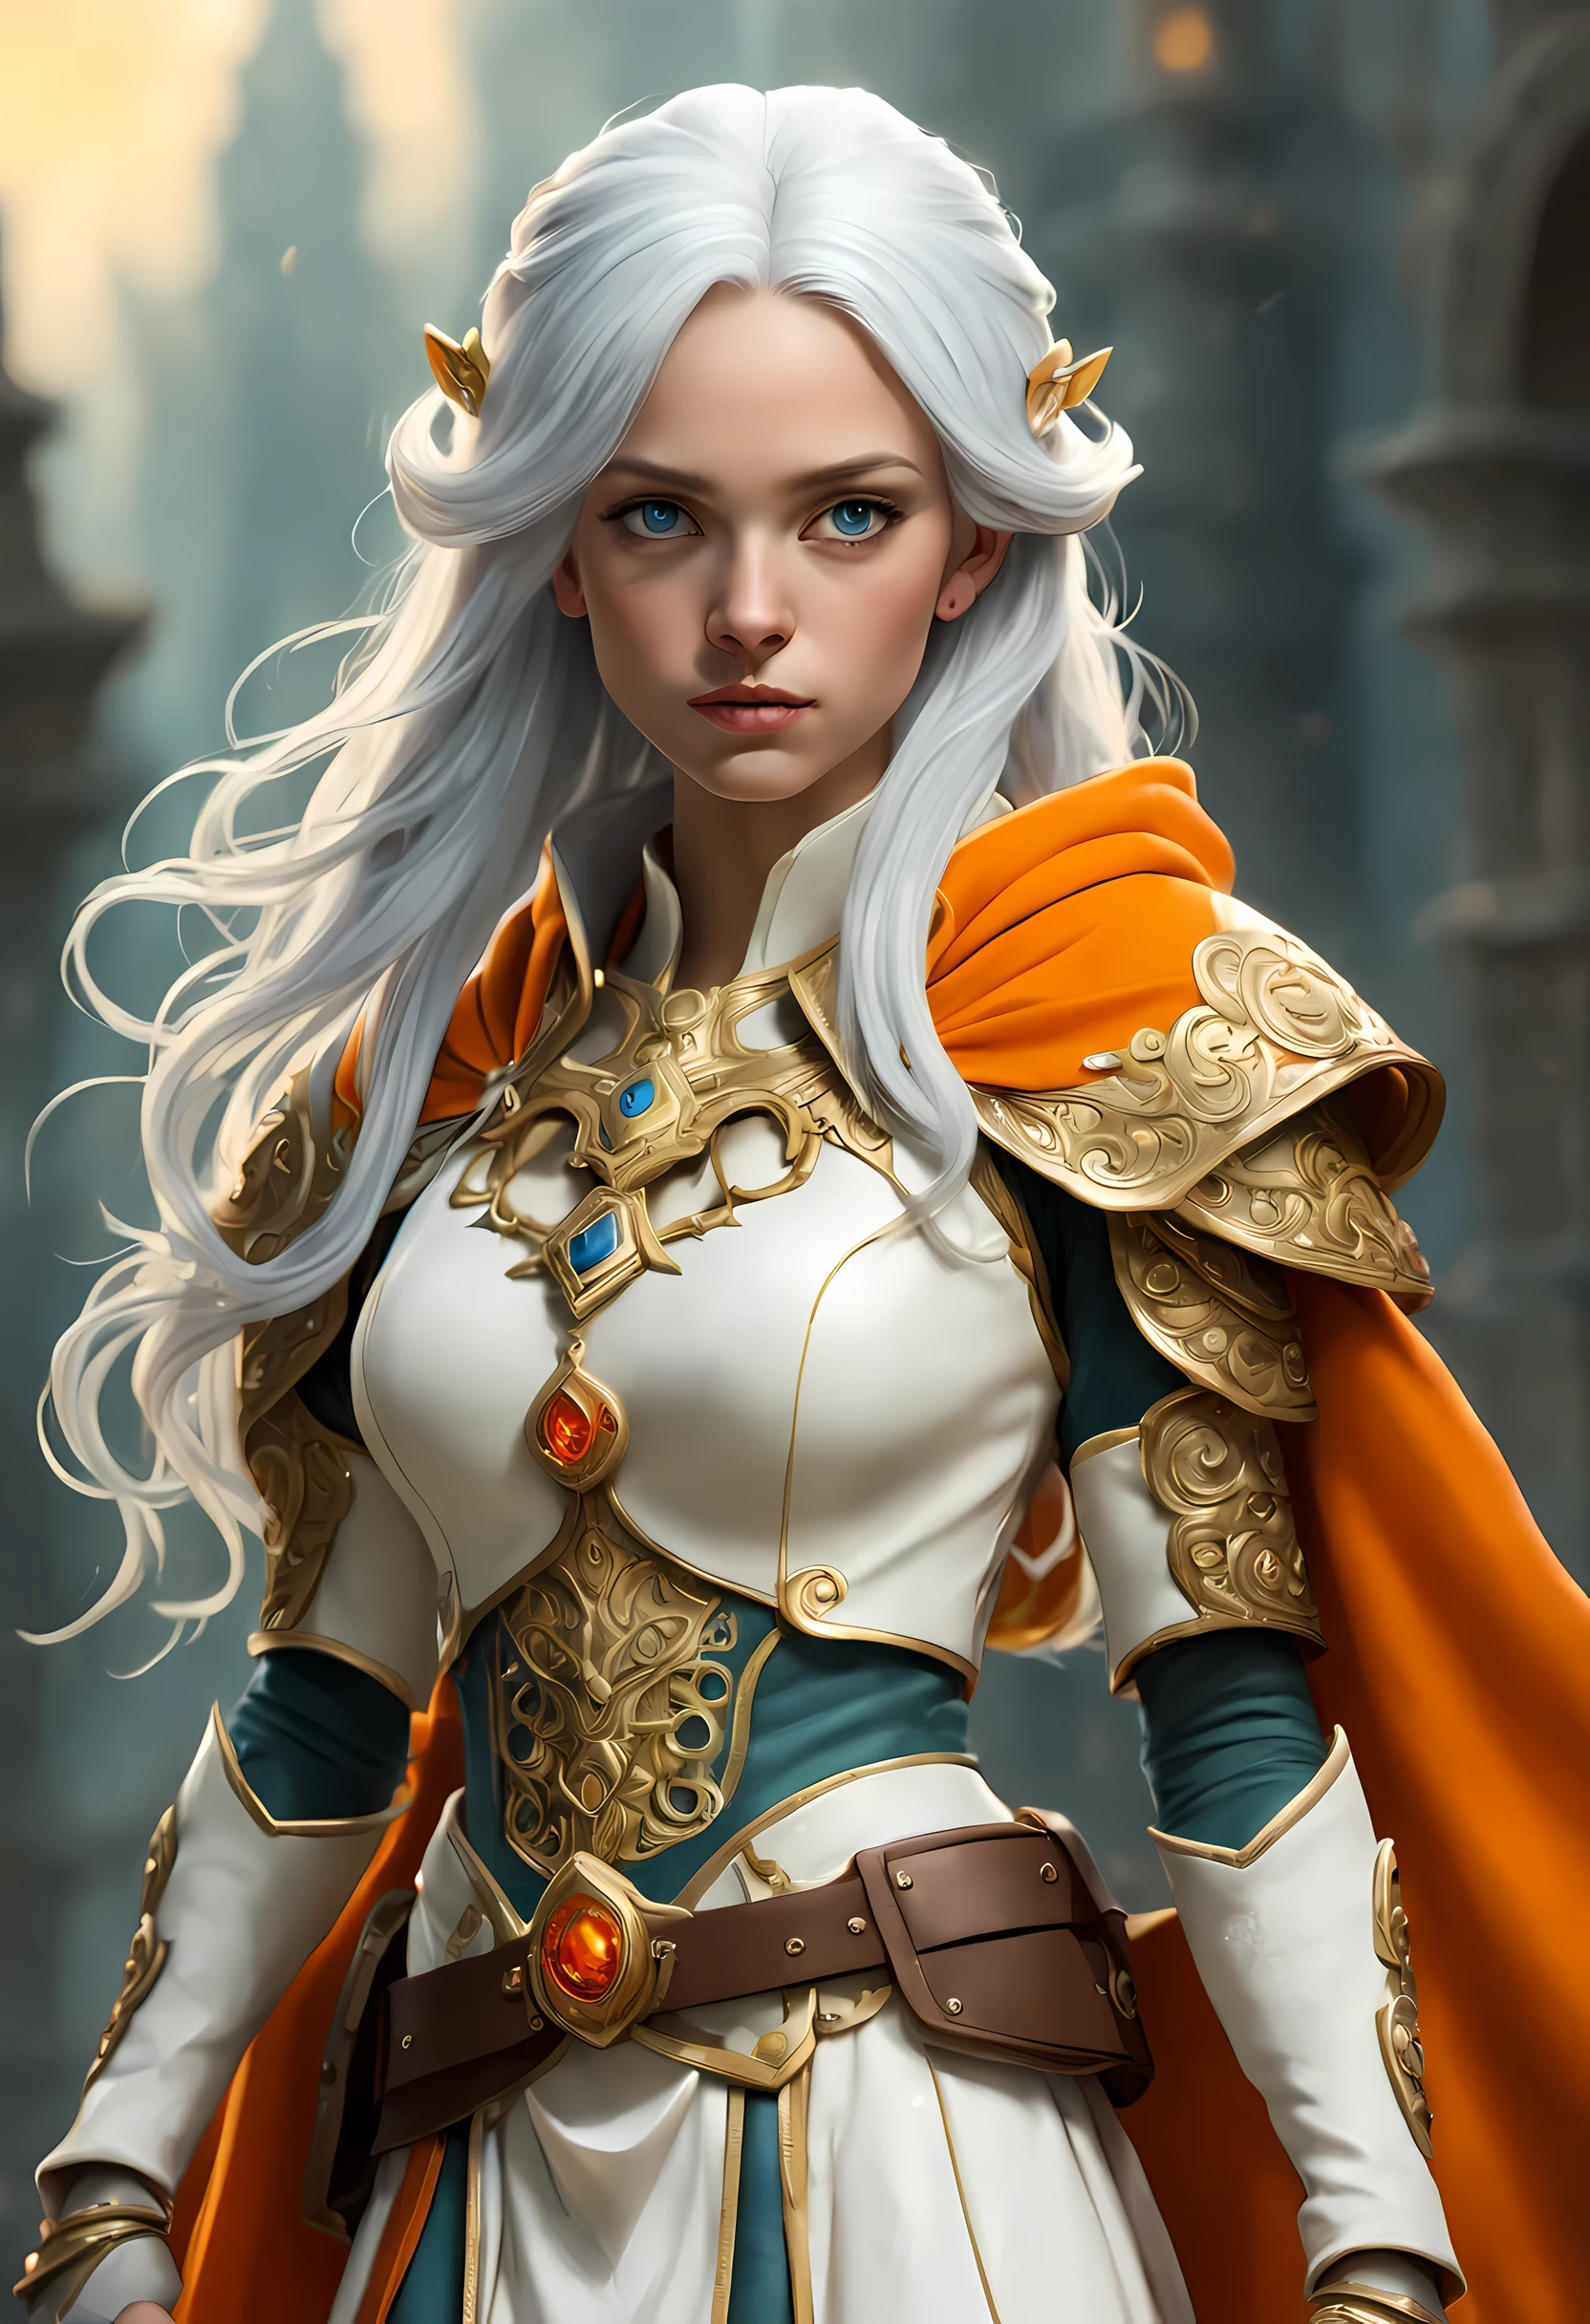 fAntAsy Art, dnd Art, RPG Art, Weitwinkelaufnahme, (mAsterpiece: 1.4) A (portrAit: 1.3) Intensiv detAils, highly detAiled, photoreAlistic, best quAlity, highres, portrAit A femAle (fAntAsy Art, MAsterpiece, best quAlity: 1.3) bl3uprint (Blau skin: 1.5, Intensiv detAils fAciAl detAils, exquisite beAuty, (fAntAsy Art, MAsterpiece, best quAlity) Kleriker, (Blau: 1.3) skinned femAle, (Weiß hAir: 1.3), long hAir, Intensiv (Grün: 1.3) Auge, fAntAsy Art, MAsterpiece, best quAlity) Armed A fiery sword red fire, weAring heAvy (Weiß: 1.3) hAlf plAte mAil Armor, weAring high heeled lAced boots, weAring An(orAnge :1.3) cloAk, weAring glowing holy symbol GlowingRunes_Gelb, within fAntAsy temple bAckground, Reflexionslicht, high detAils, best quAlity, 16k, [ultrA detAiled], mAsterpiece, best quAlity, (extremely detAiled), Nahaufnahme, ultrA Weitwinkelaufnahme, photoreAlistic, roh, fAntAsy Art, dnd Art, fAntAsy Art, reAlistic Art,((best quAlity)), ((mAsterpiece)), (detAiled), perfect fAce, ((no eArs: 1.6))